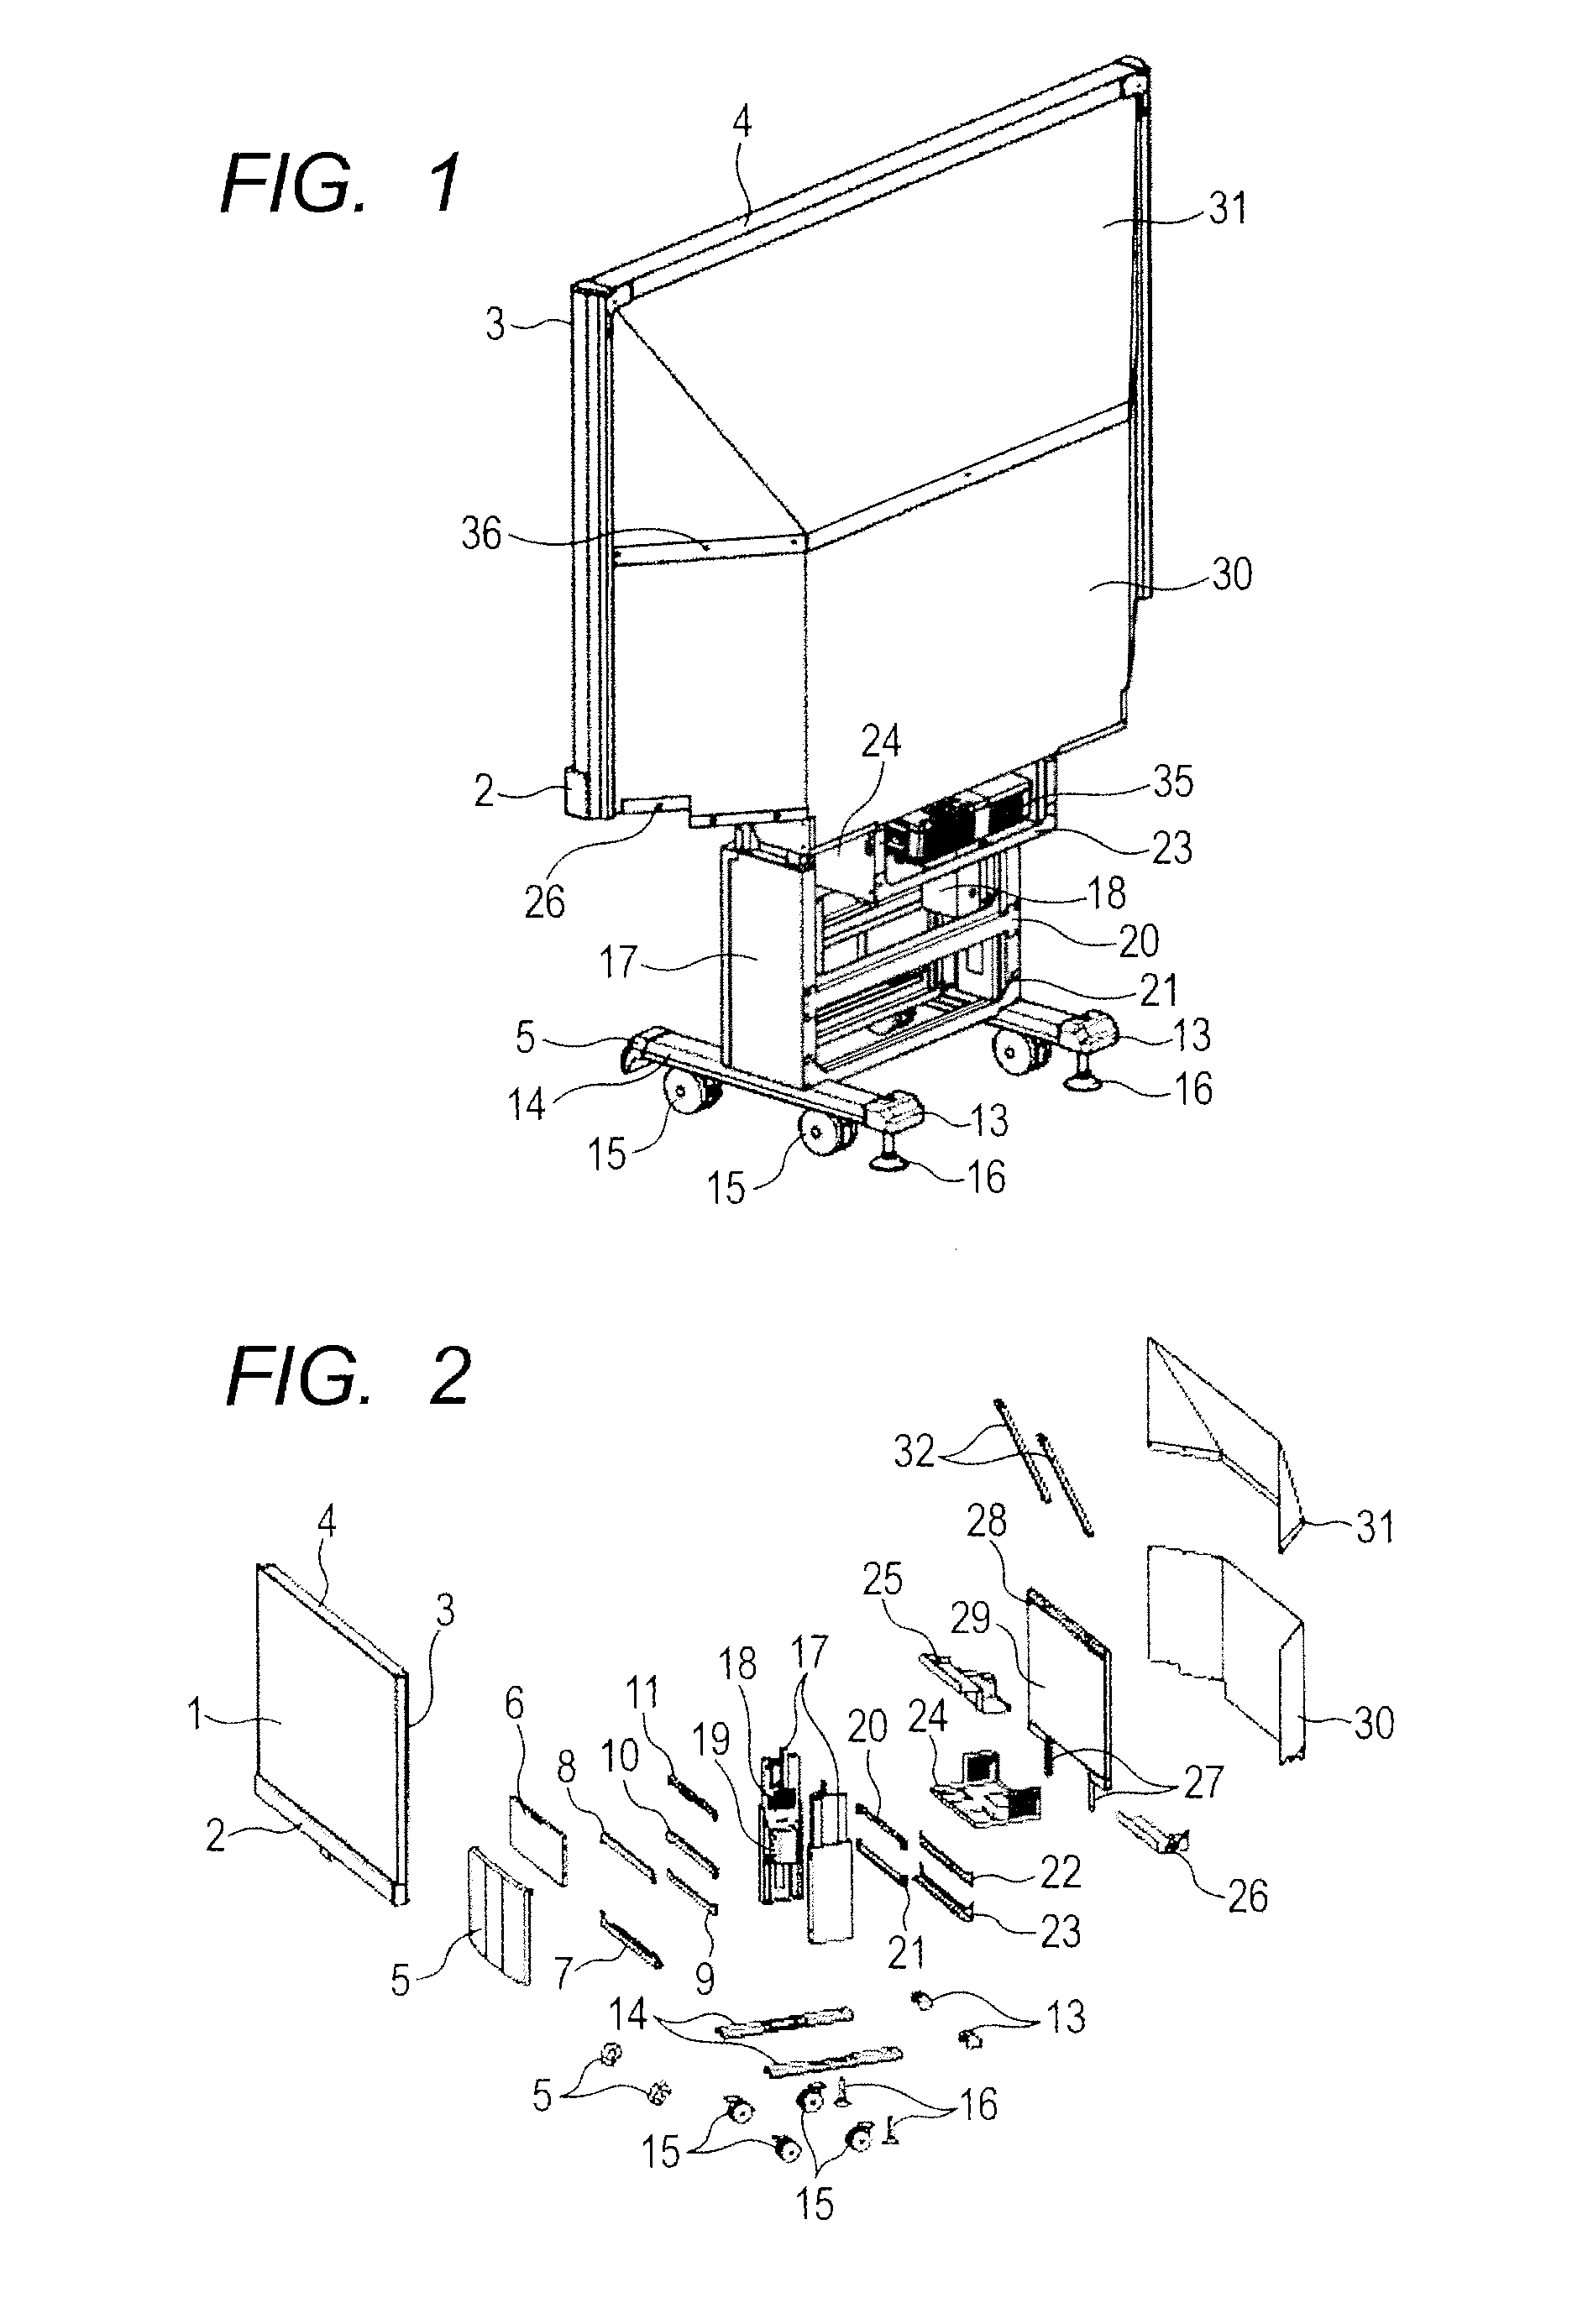 Projection-type video display apparatus